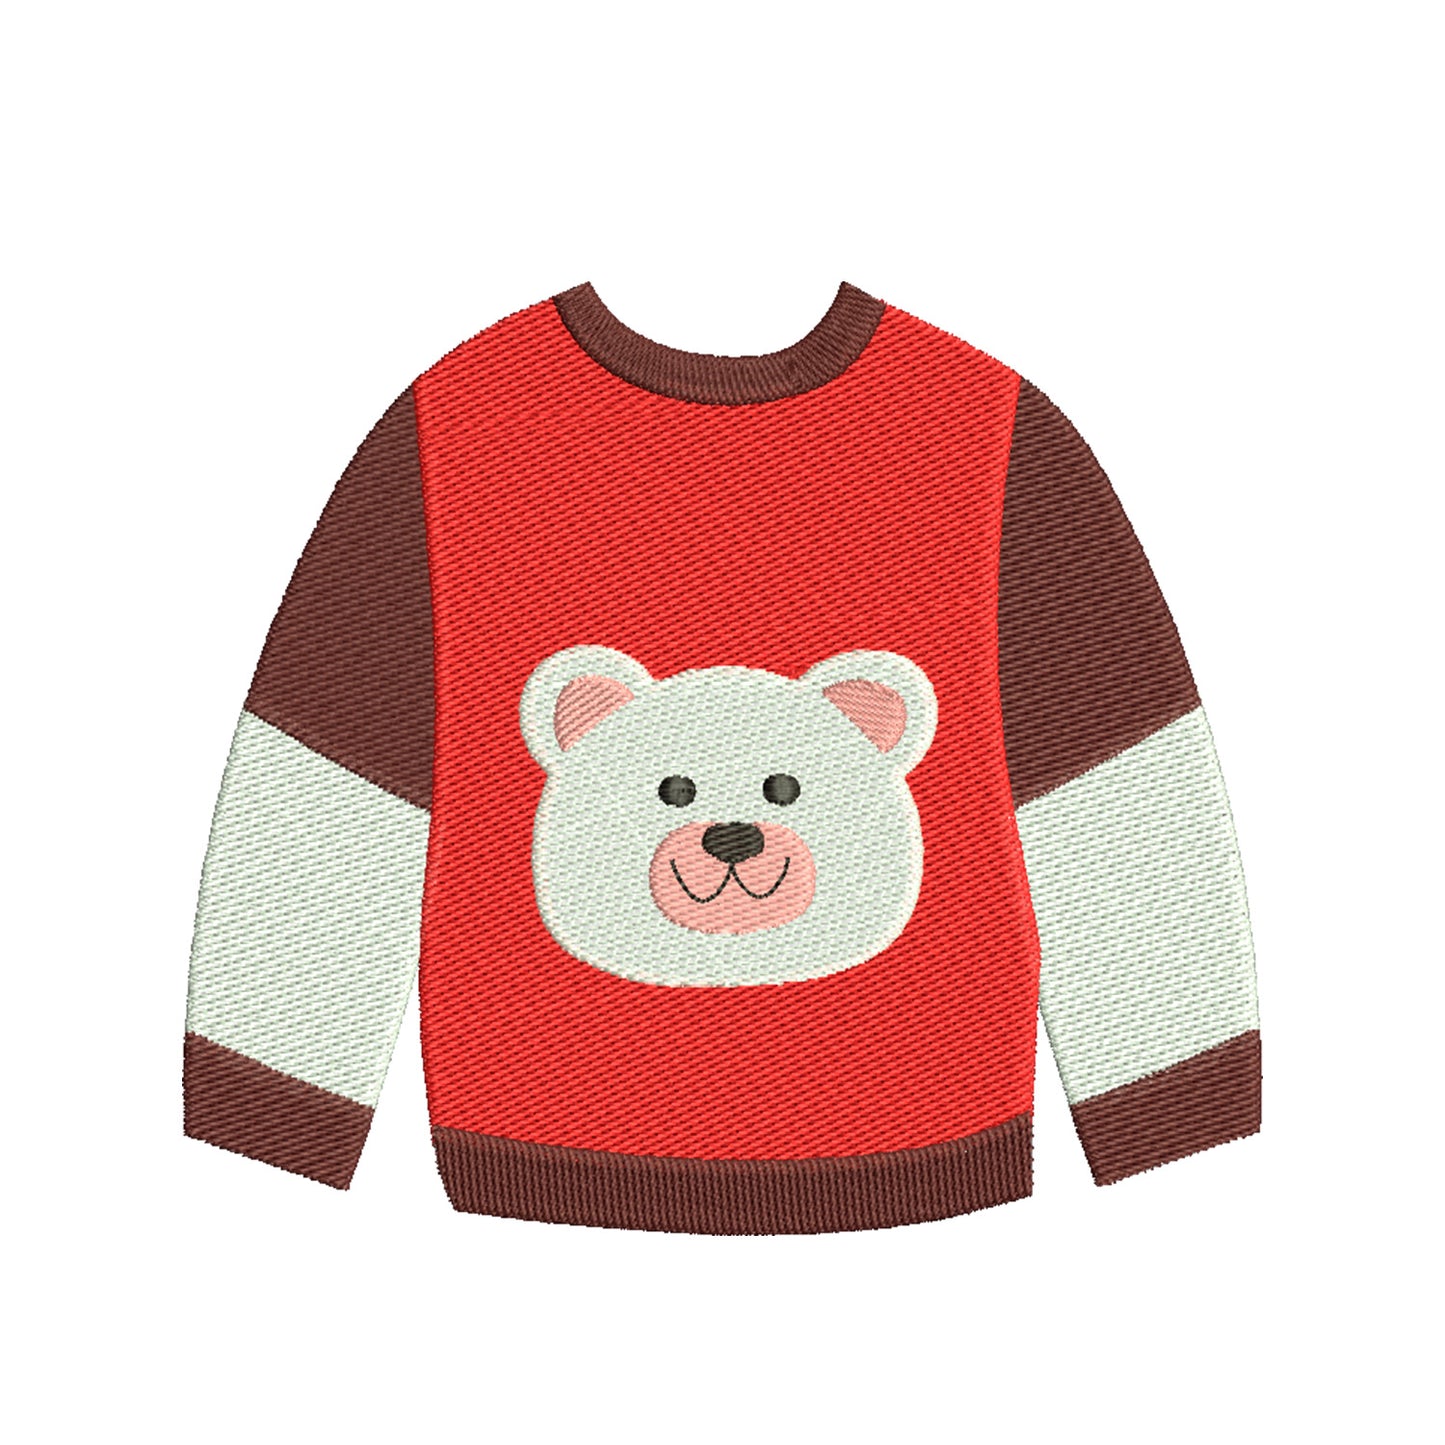 Bear christmas sweater embroidery designs - 910077